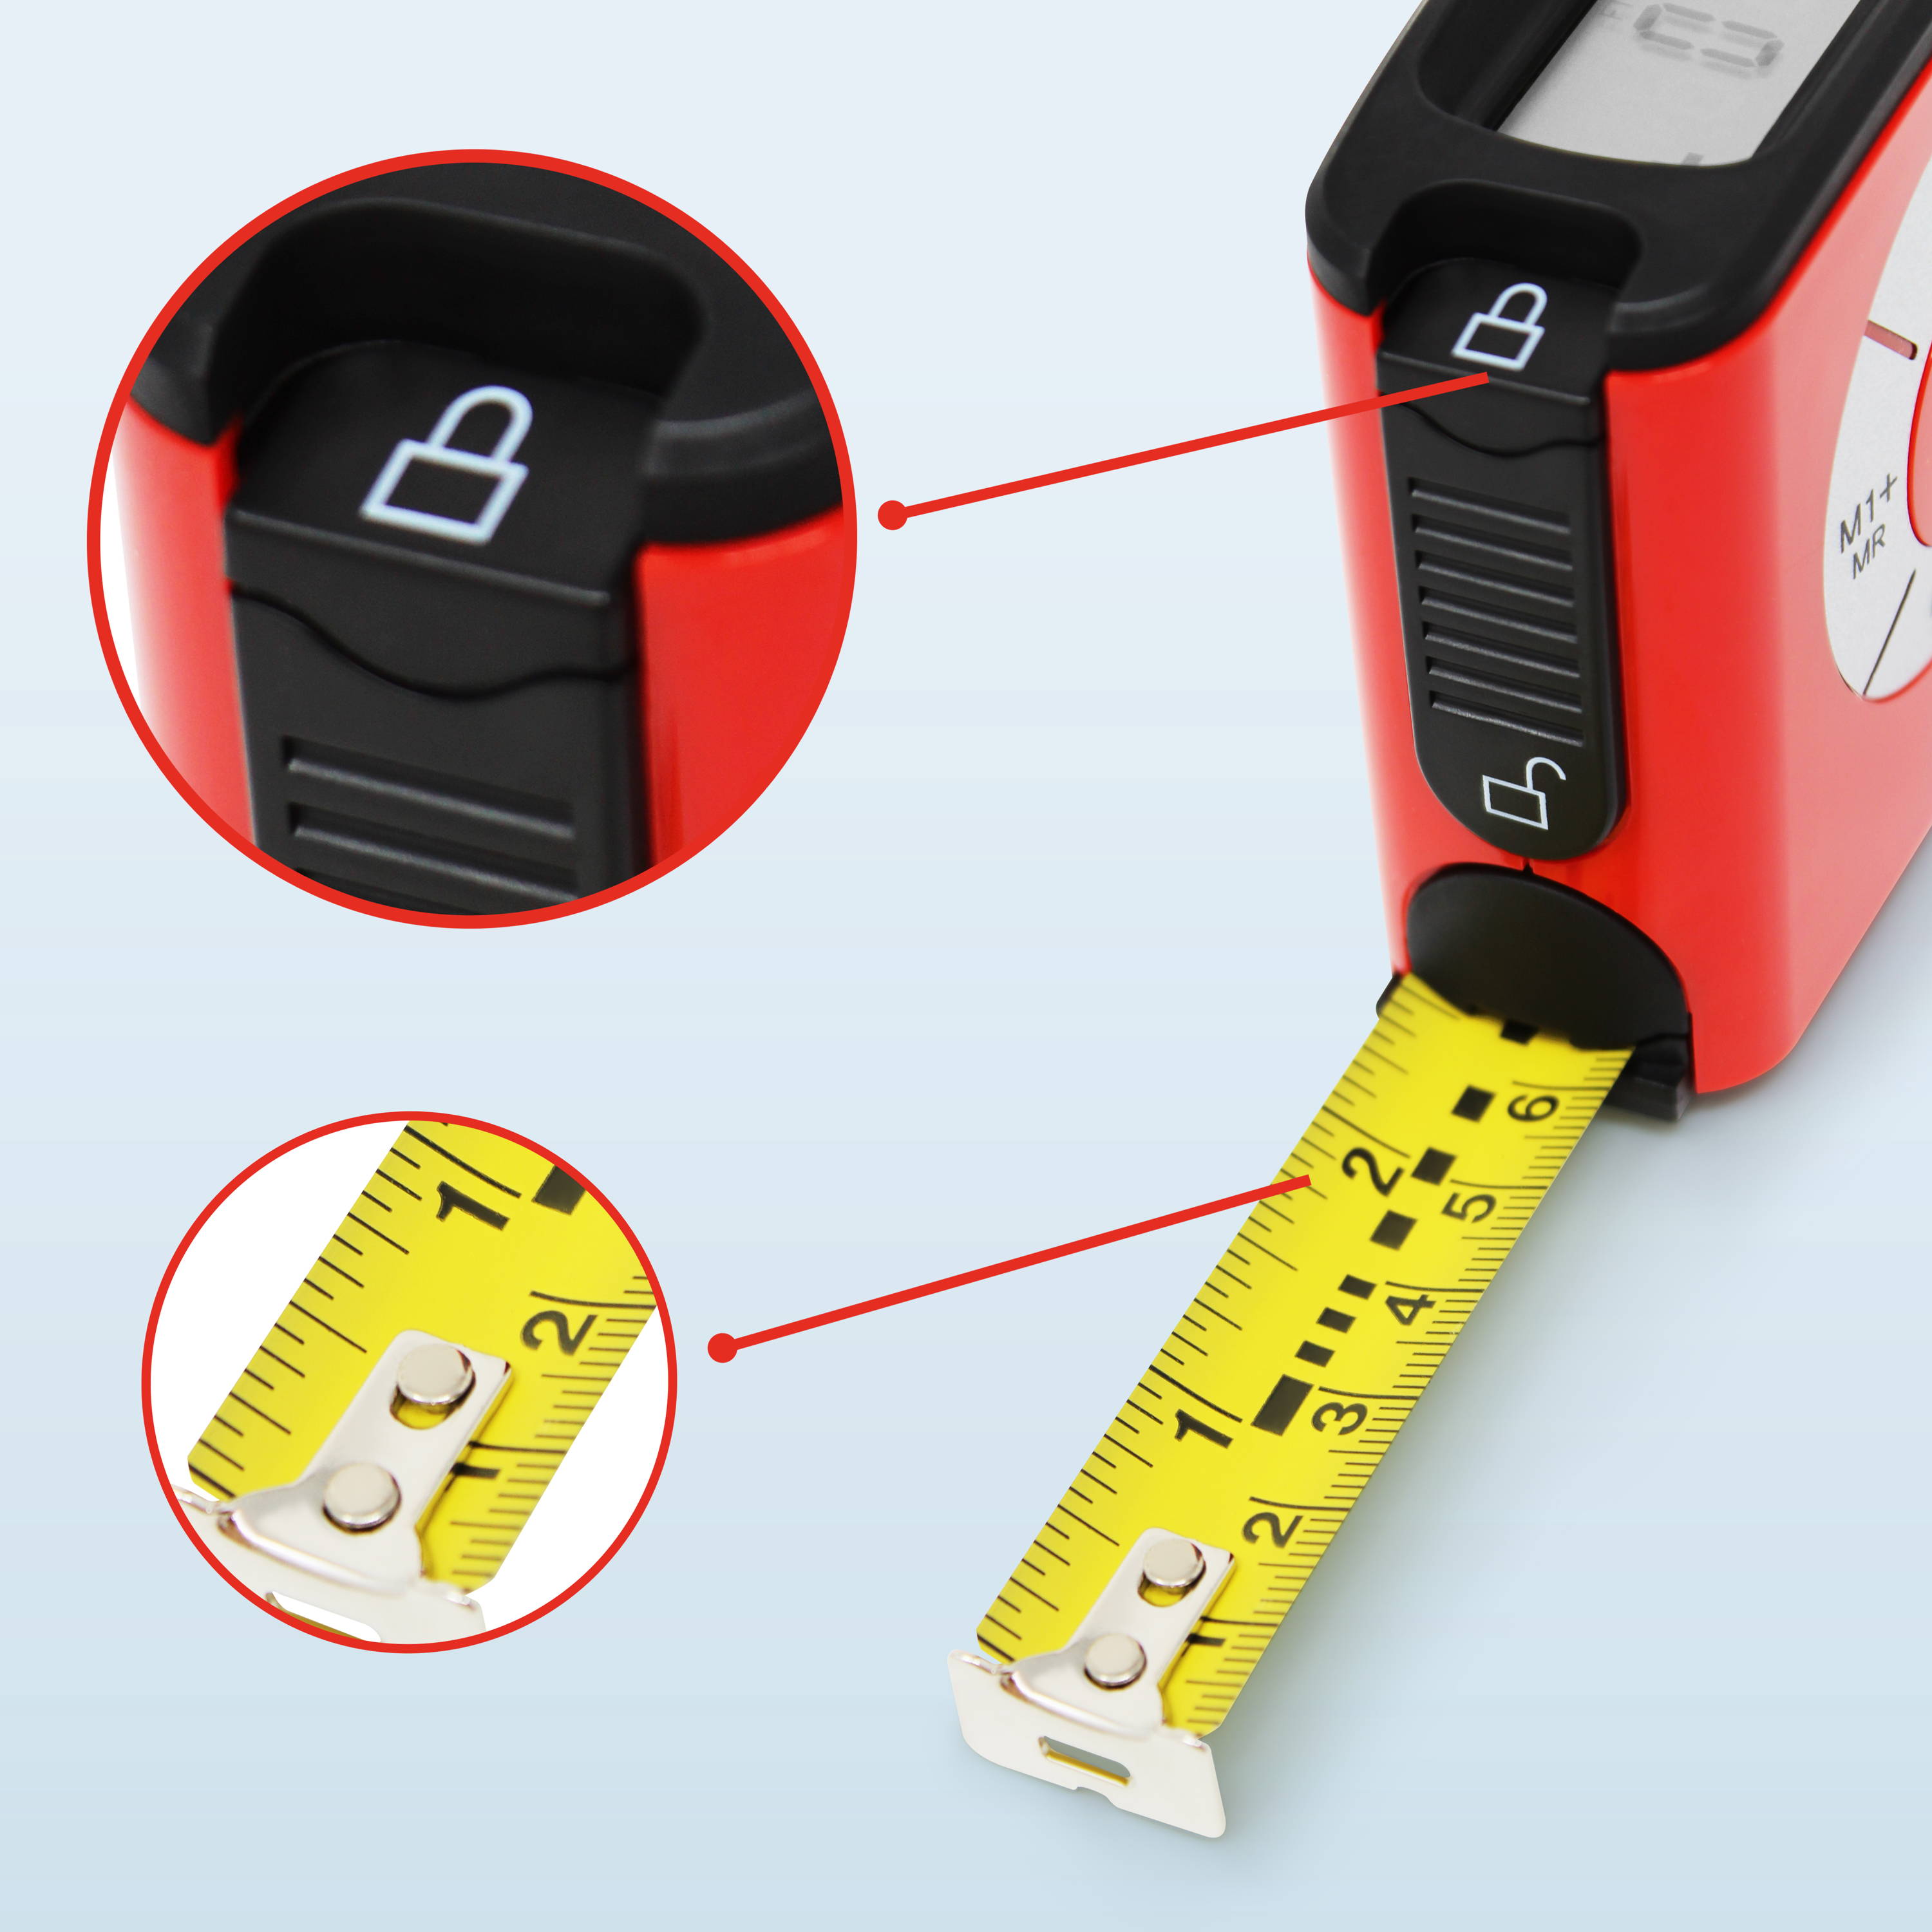 KOISS Digital Tape Measure - Inches and Centimeters Online USA.